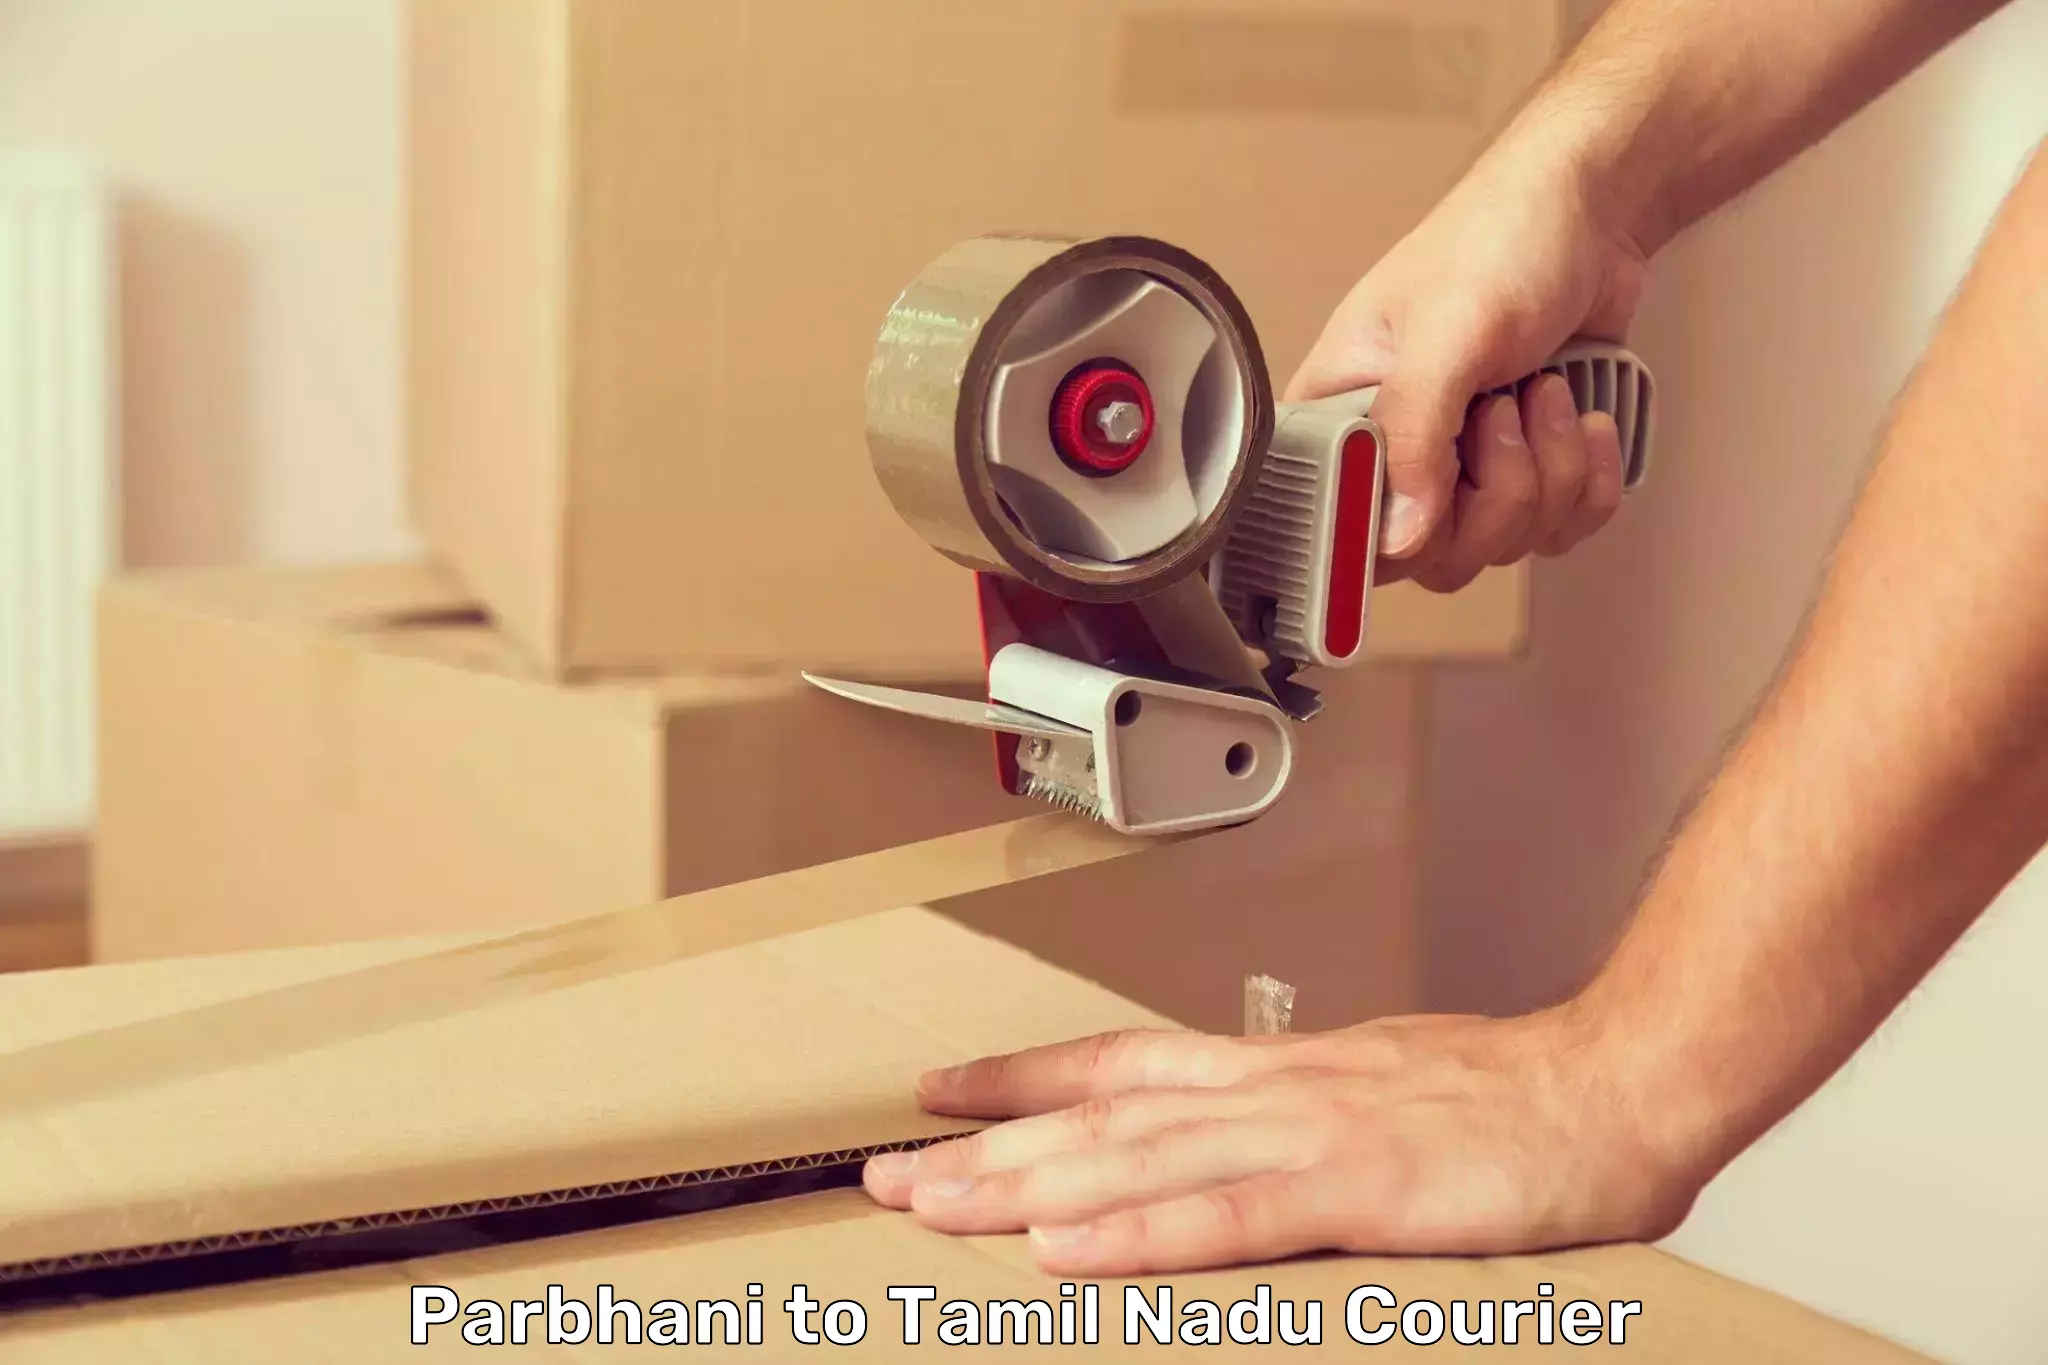 Bulk courier orders in Parbhani to Tamil Nadu